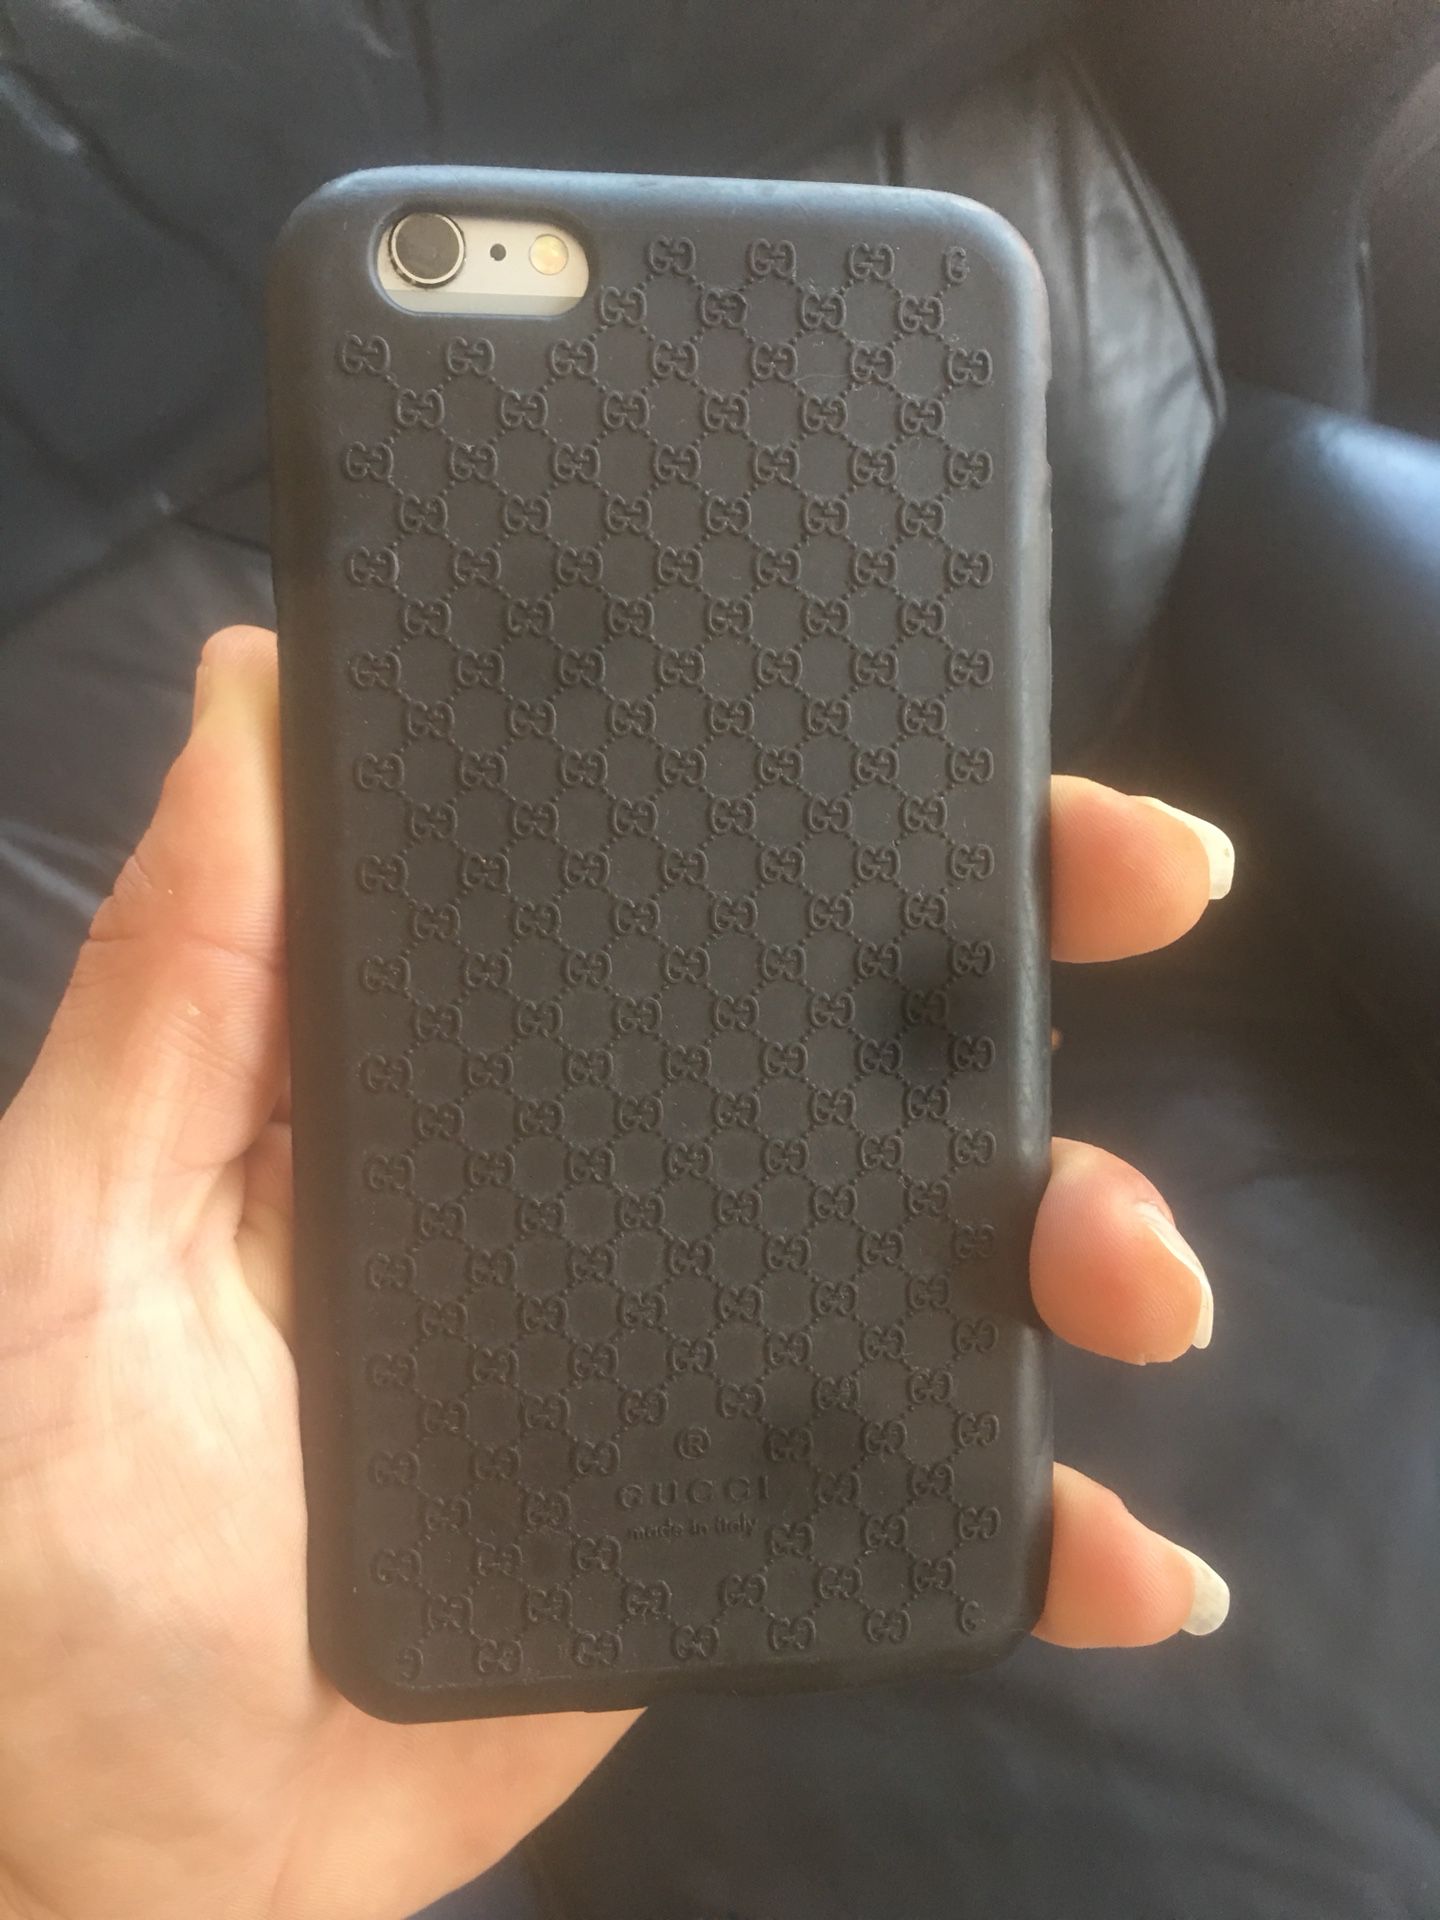 Authentic Gucci IPhone 6s Plus Guccisma Black Phone Case made in Italy Limited Edition for Sale in Glendale, CA - OfferUp